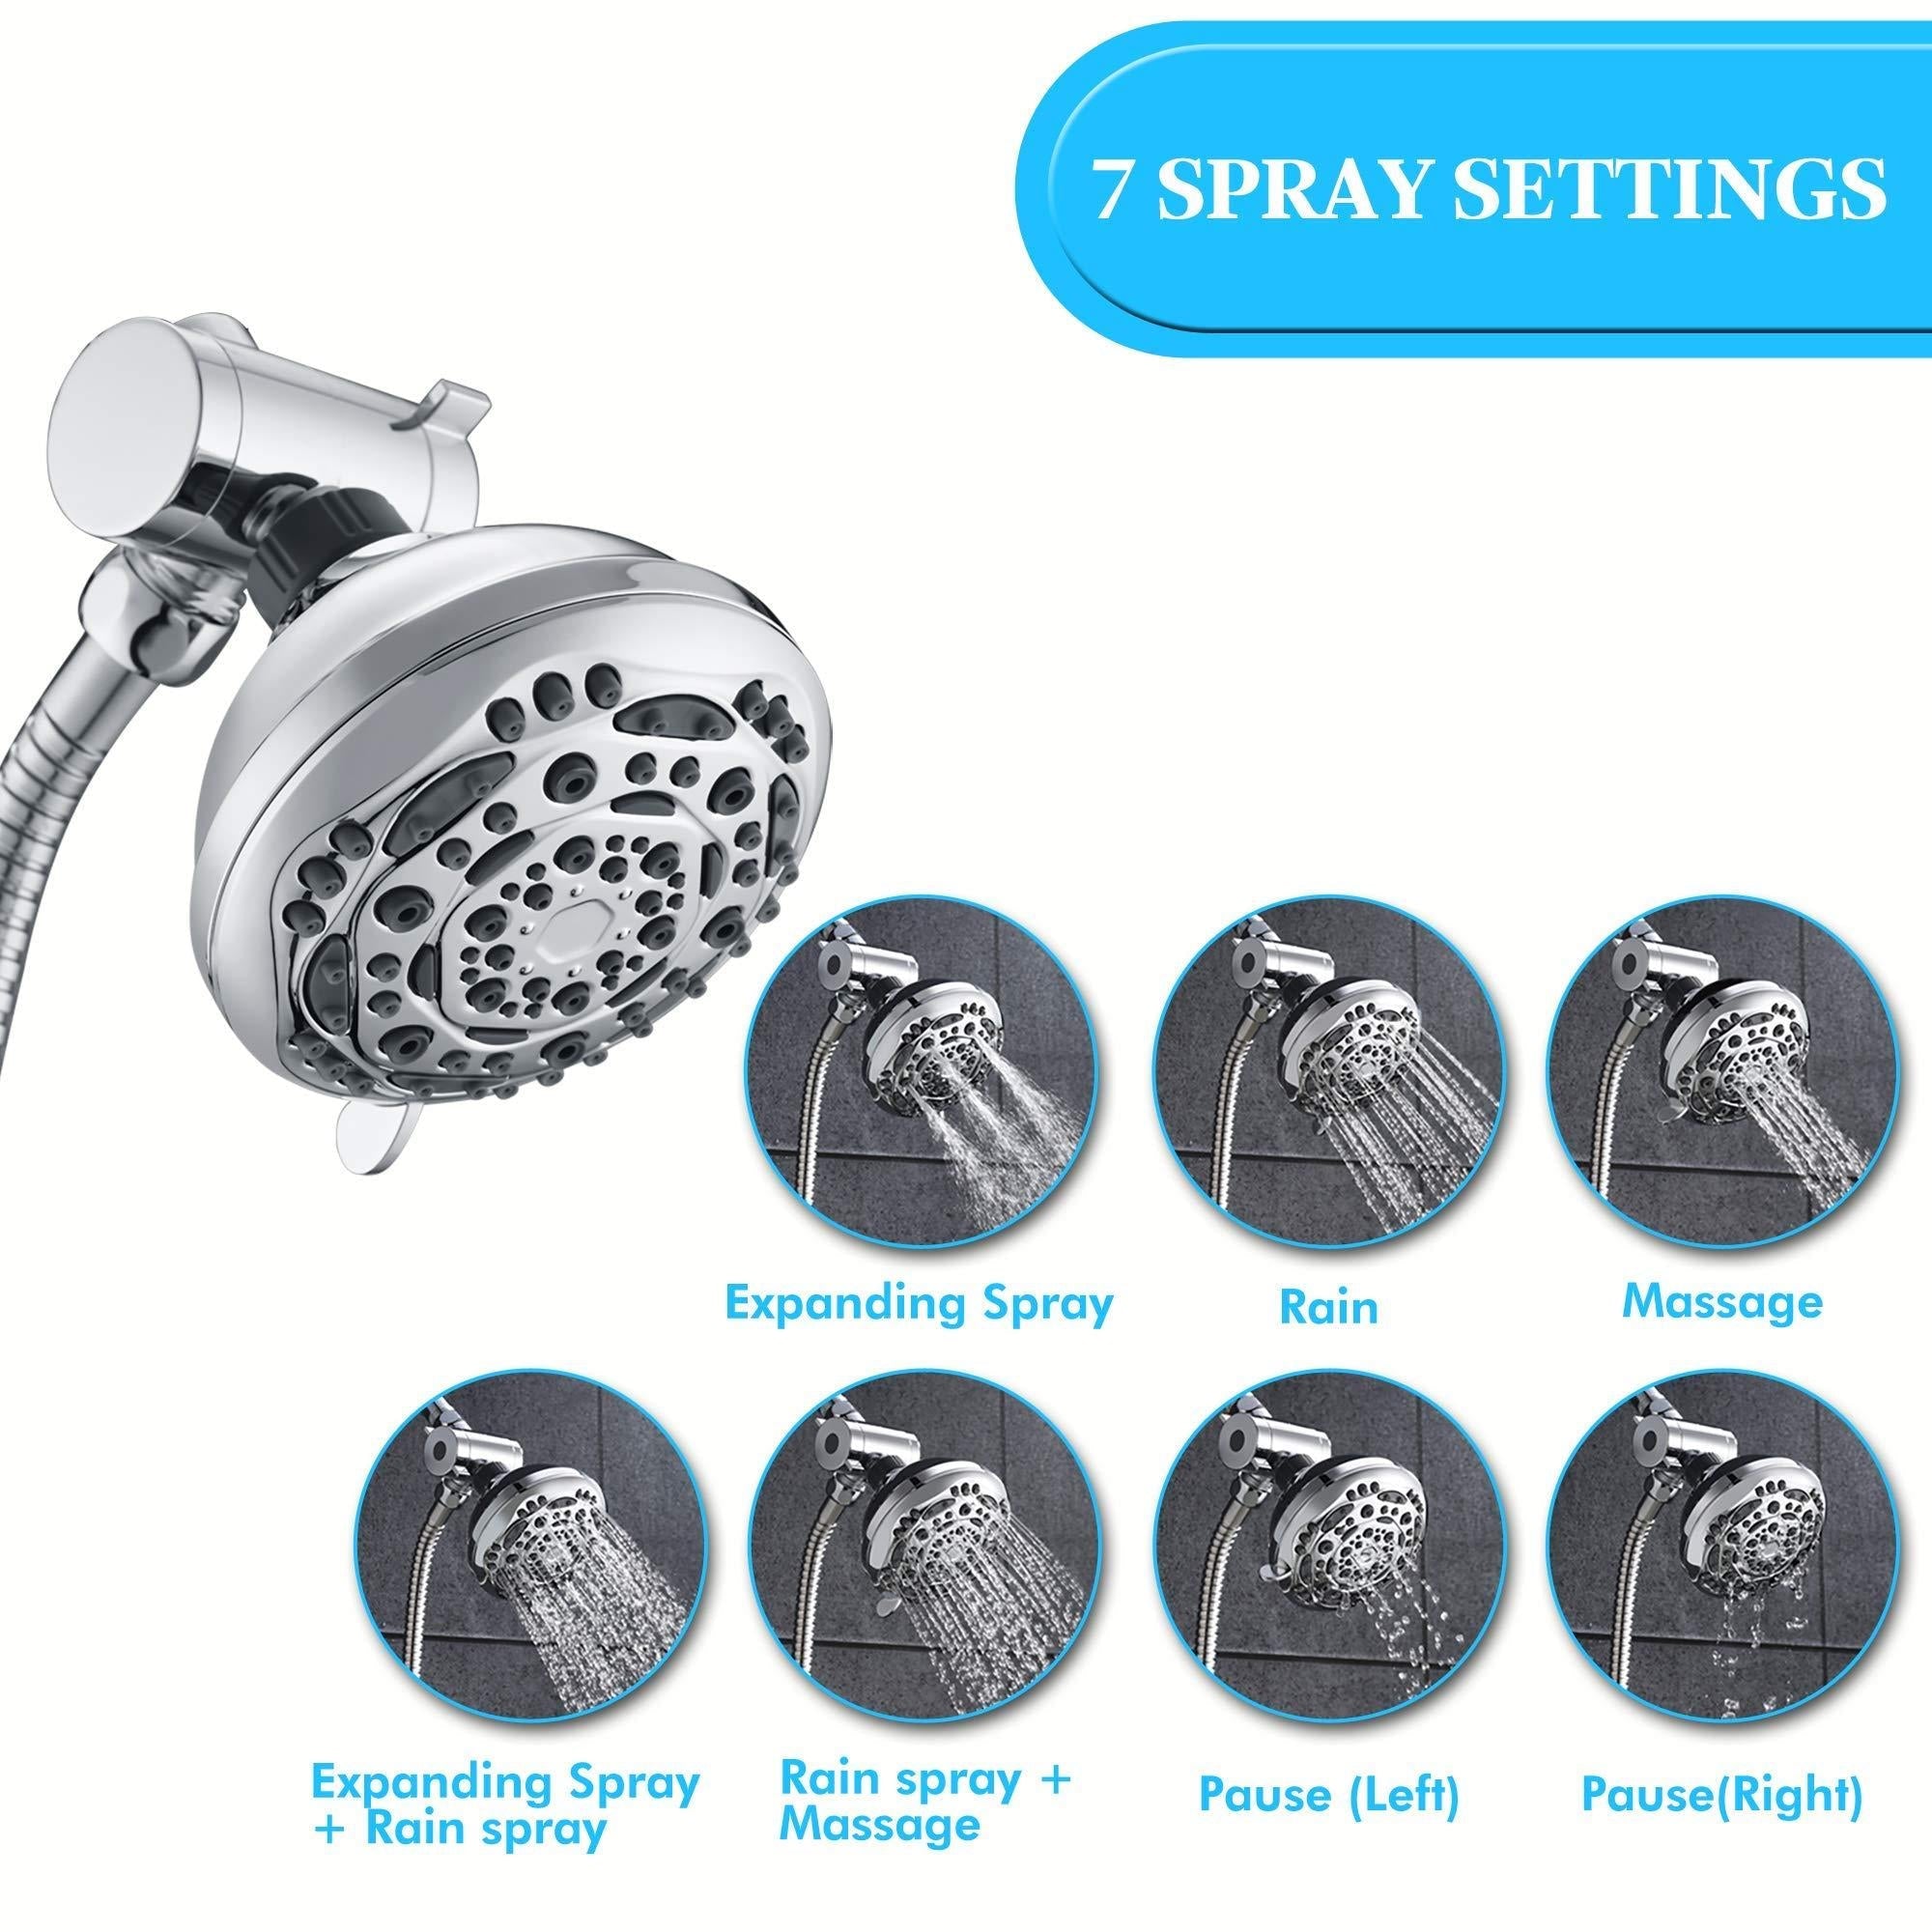 2 in 1 Shower Head Systemwith 7 Spray Setting Moorescarts